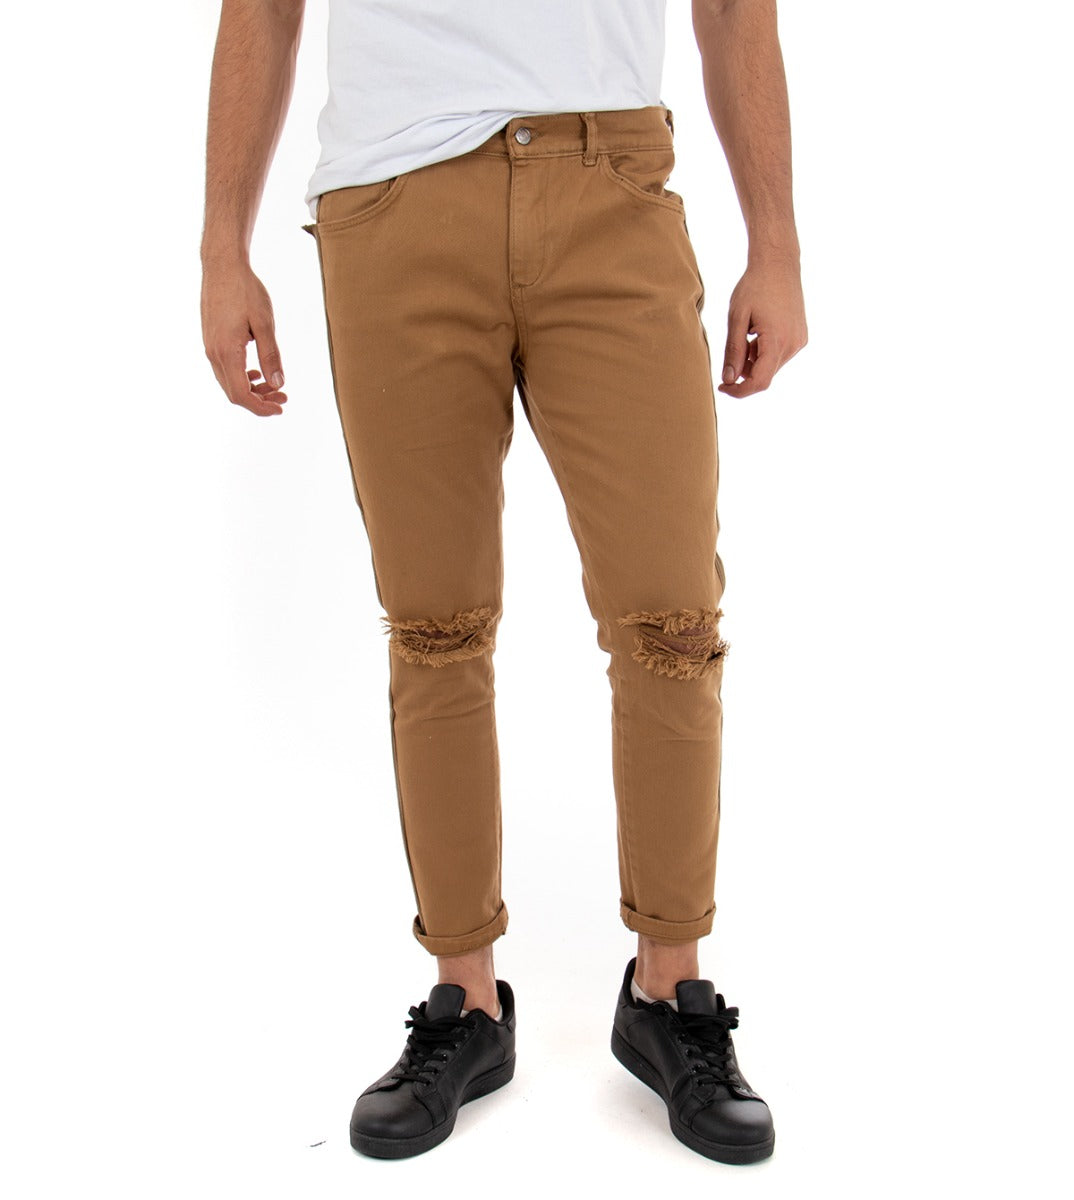 Slim Fit Men's Knee-Length Jeans Pants Camel Casual GIOSAL-P3321A